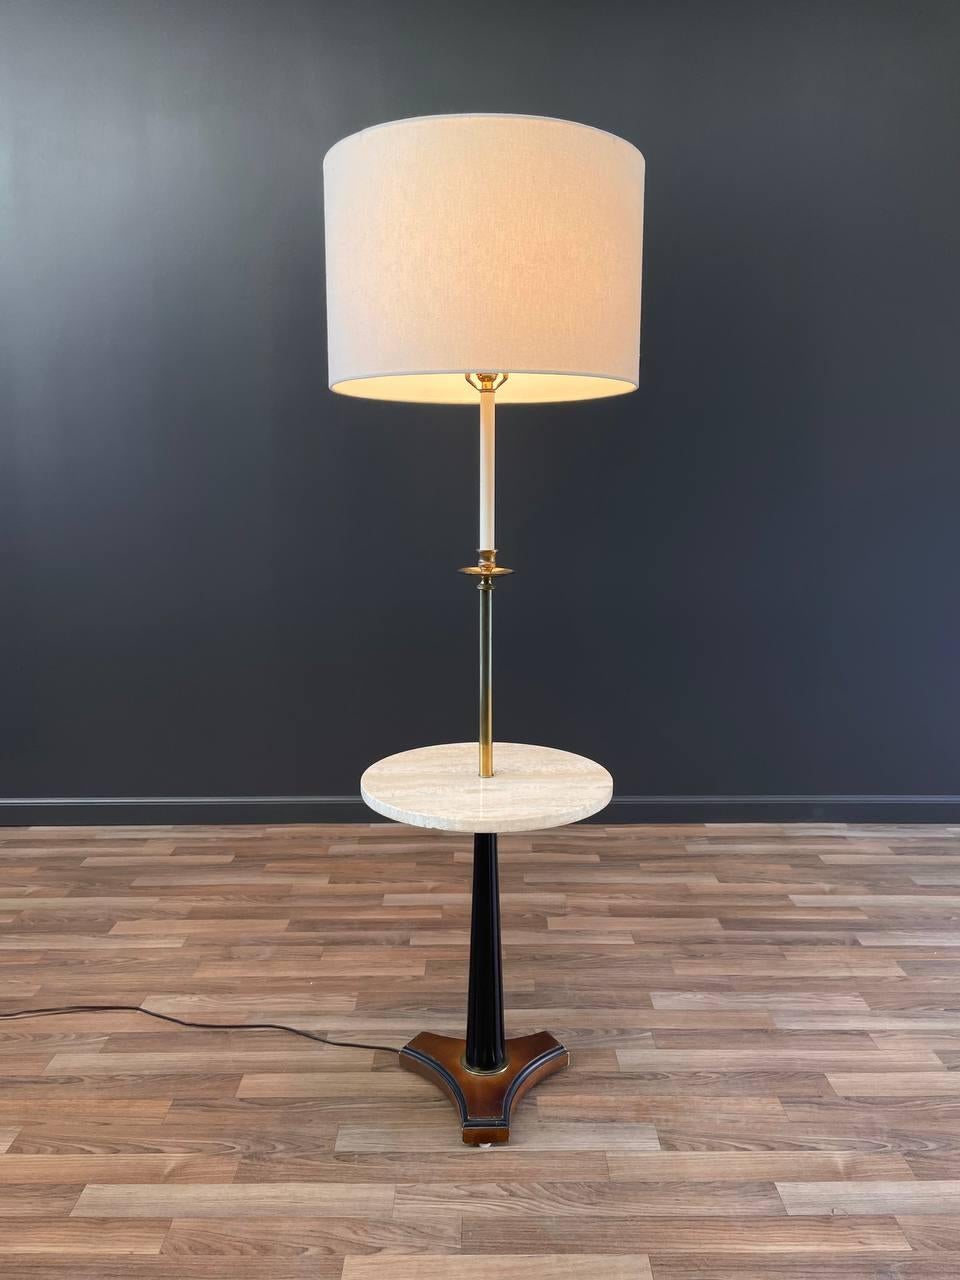 Newly Rewired, New Linen Shade, Wood in Original Vintage Condition

Dimensions: 
57.50”H x 16”W x 16” D
Shade:
12”H x 18”W x 18”D

Materials: New Linen Shade, Patinated Brass, Ebonized Wood, Italian Travertine 